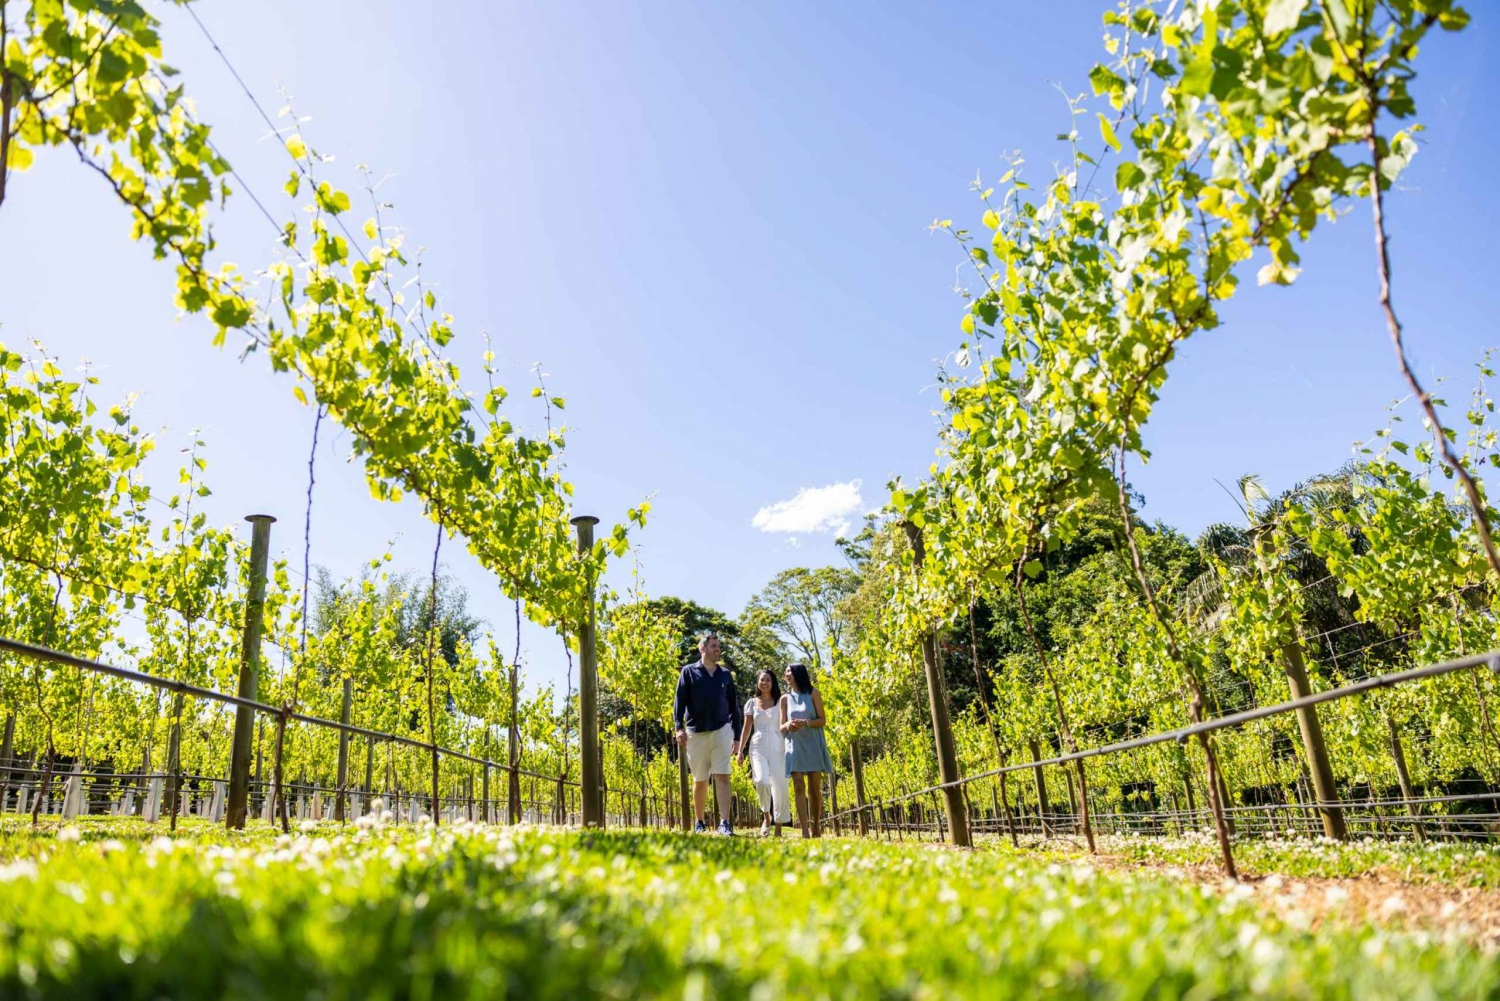 Gold Coast: Winery Tour with Tastings and 2-Course Lunch